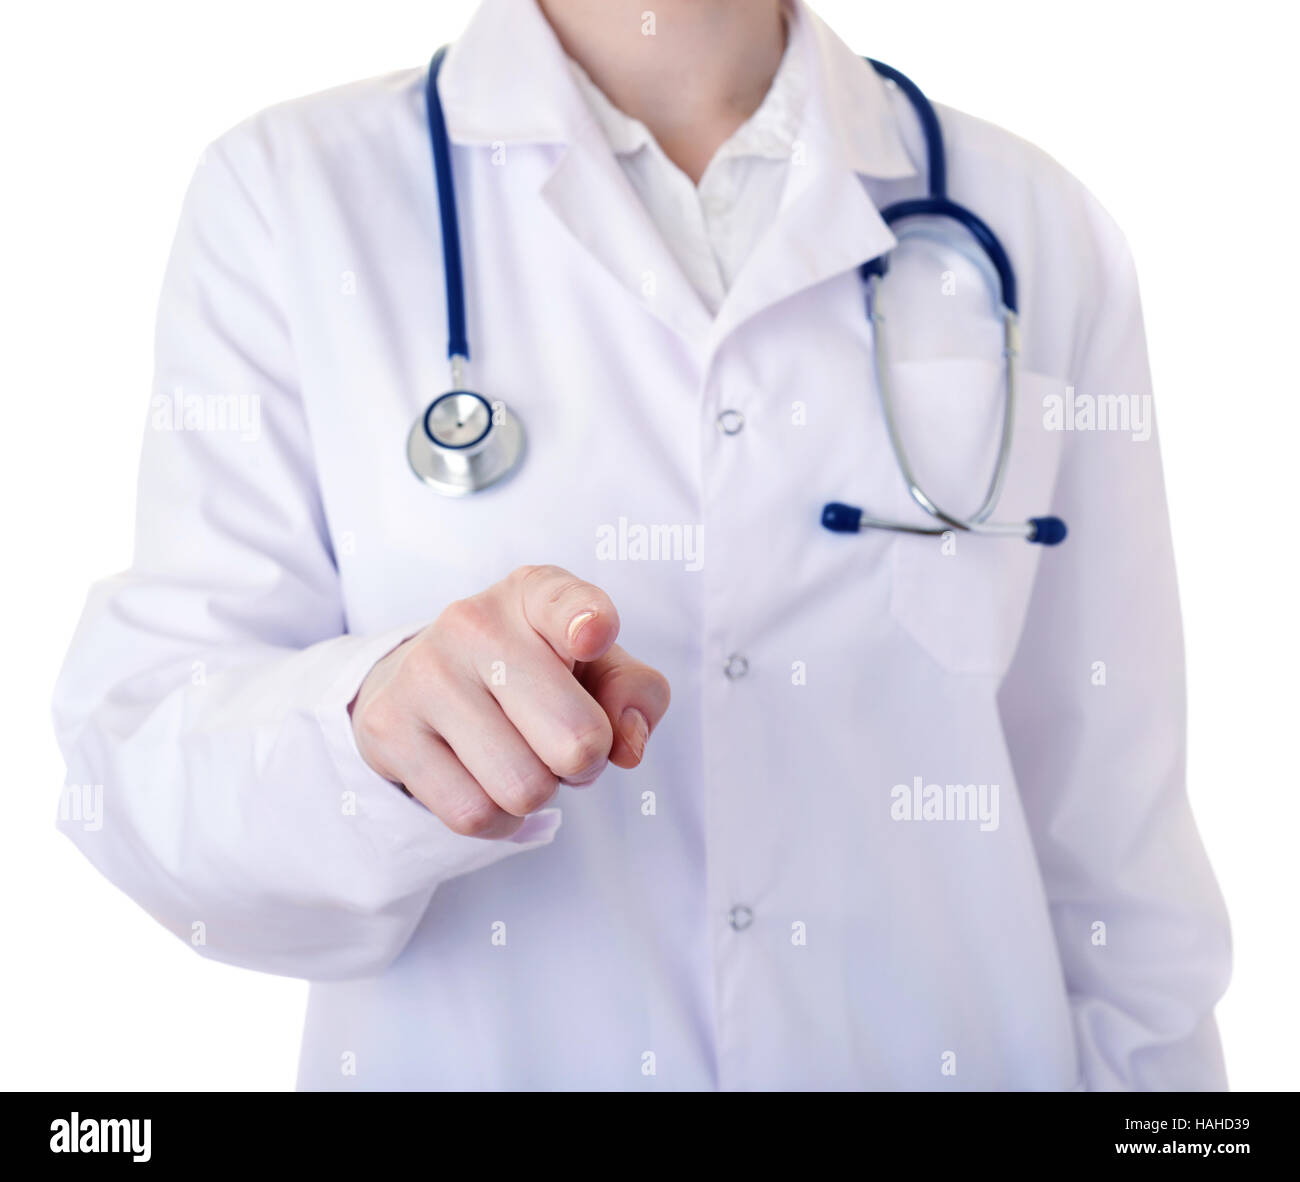 Female doctor assistant in white coat over isolated background Stock Photo